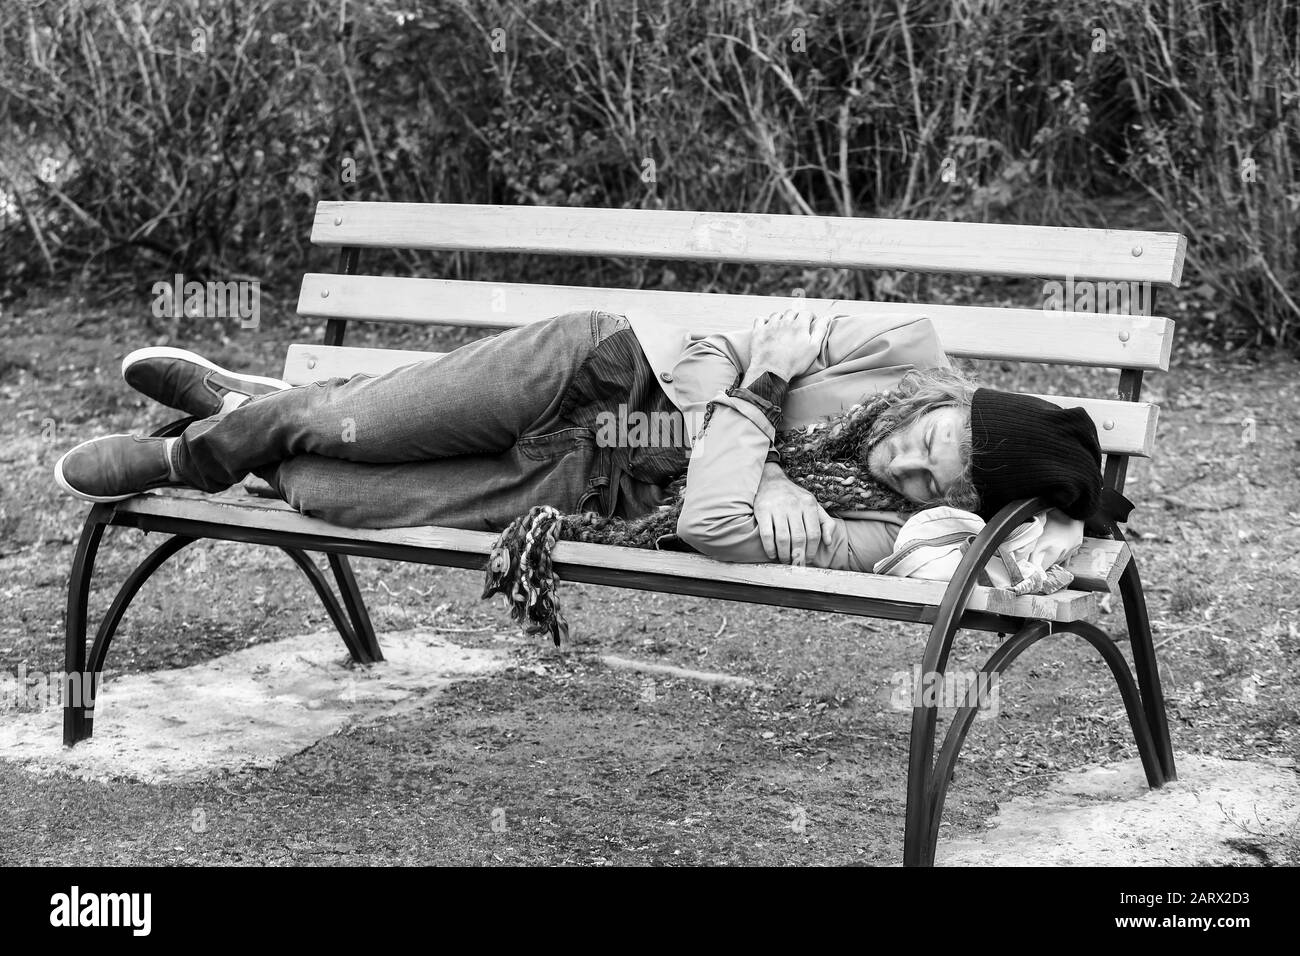 Black And White Portrait Of Poor Homeless Man Sleeping On Bench Outdoors Stock Photo Alamy